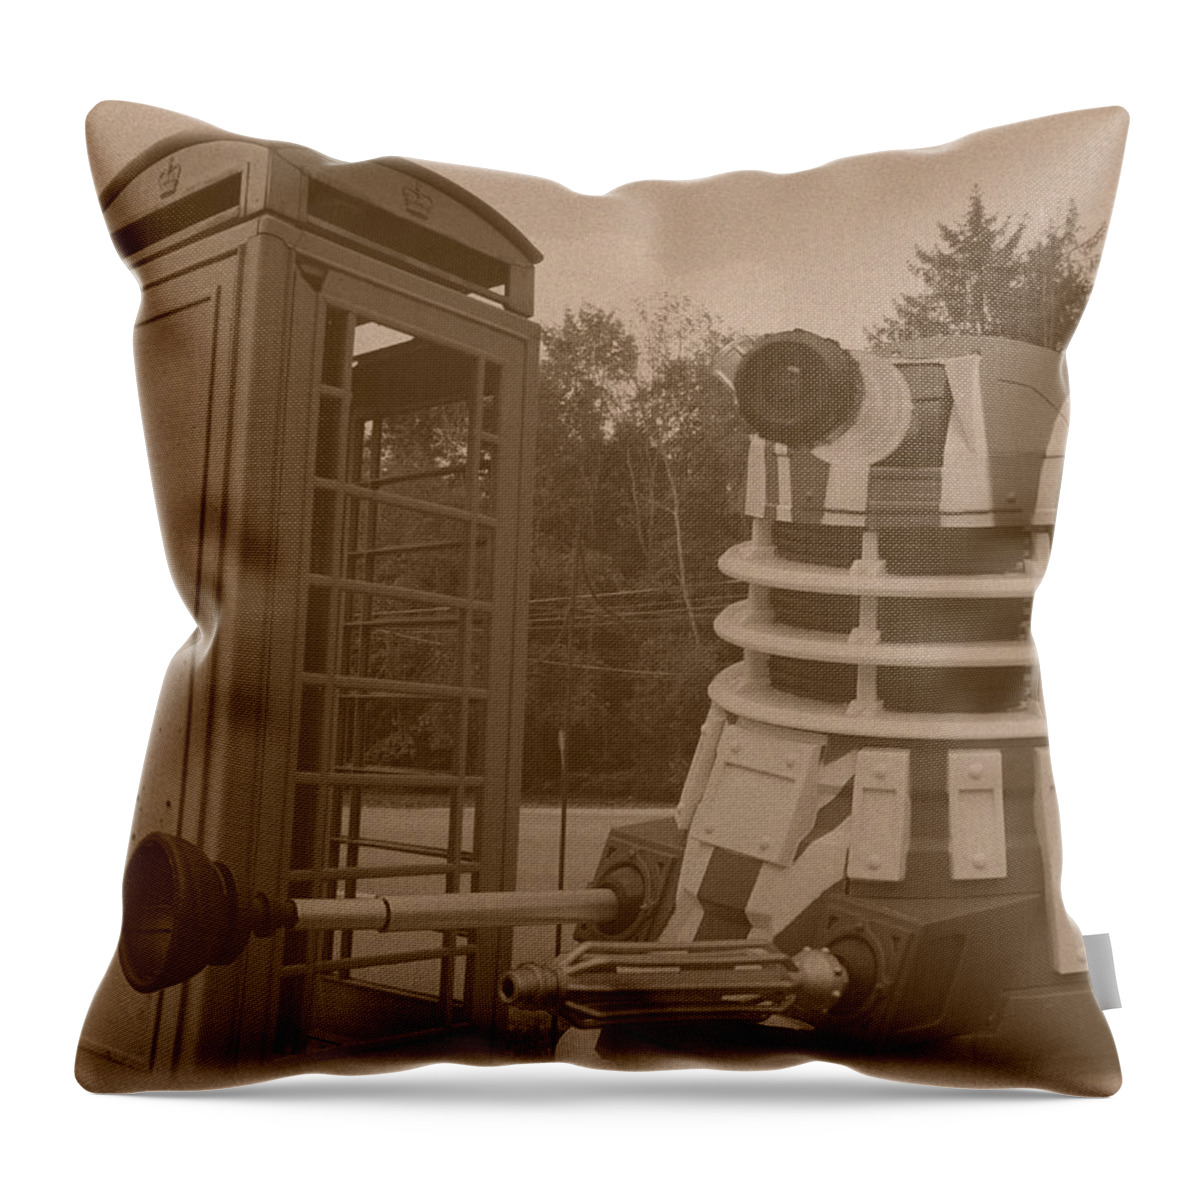 Richard Reeve Throw Pillow featuring the photograph Dr Who - The Wrong Box by Richard Reeve